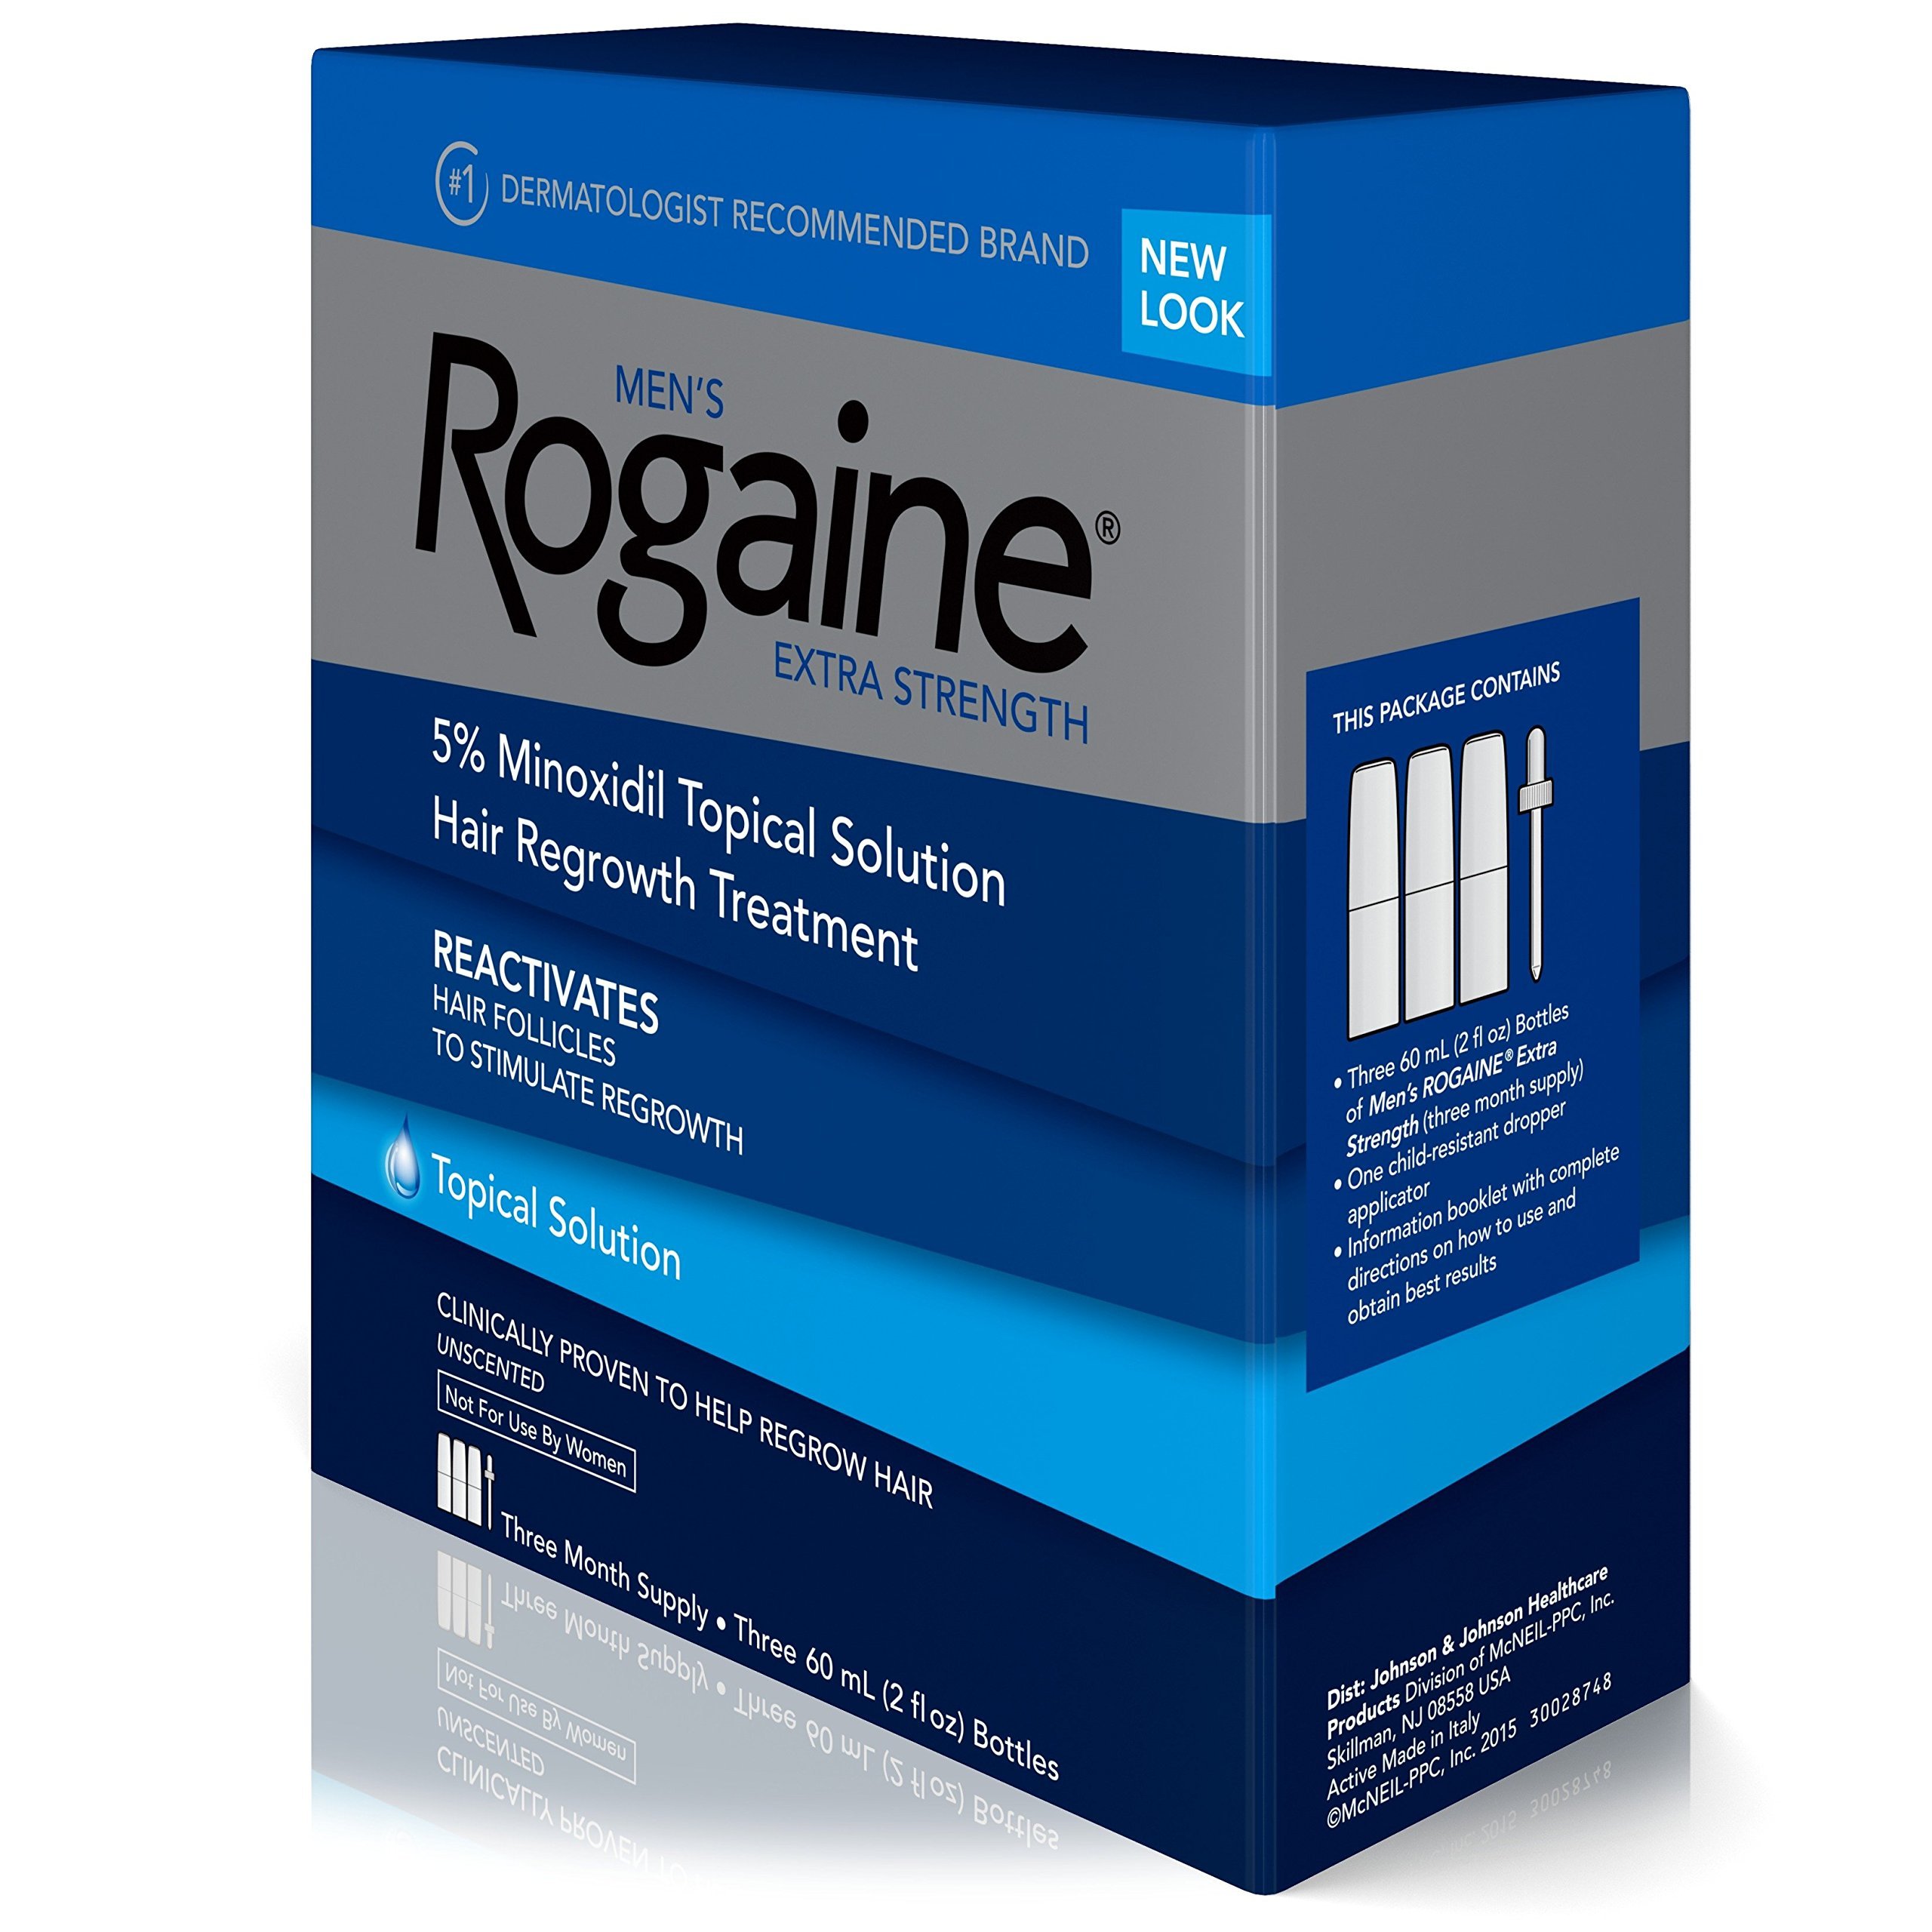 Men's Rogaine 5% Minoxidil Foam, 2.11 Ounce (Pack of 3) & Rogaine Extra Strength 5% Minoxidil Topical Solution for Hair Loss and Hair Regrowth, Topical Treatment for Thinning Hair, 3-Month Supply